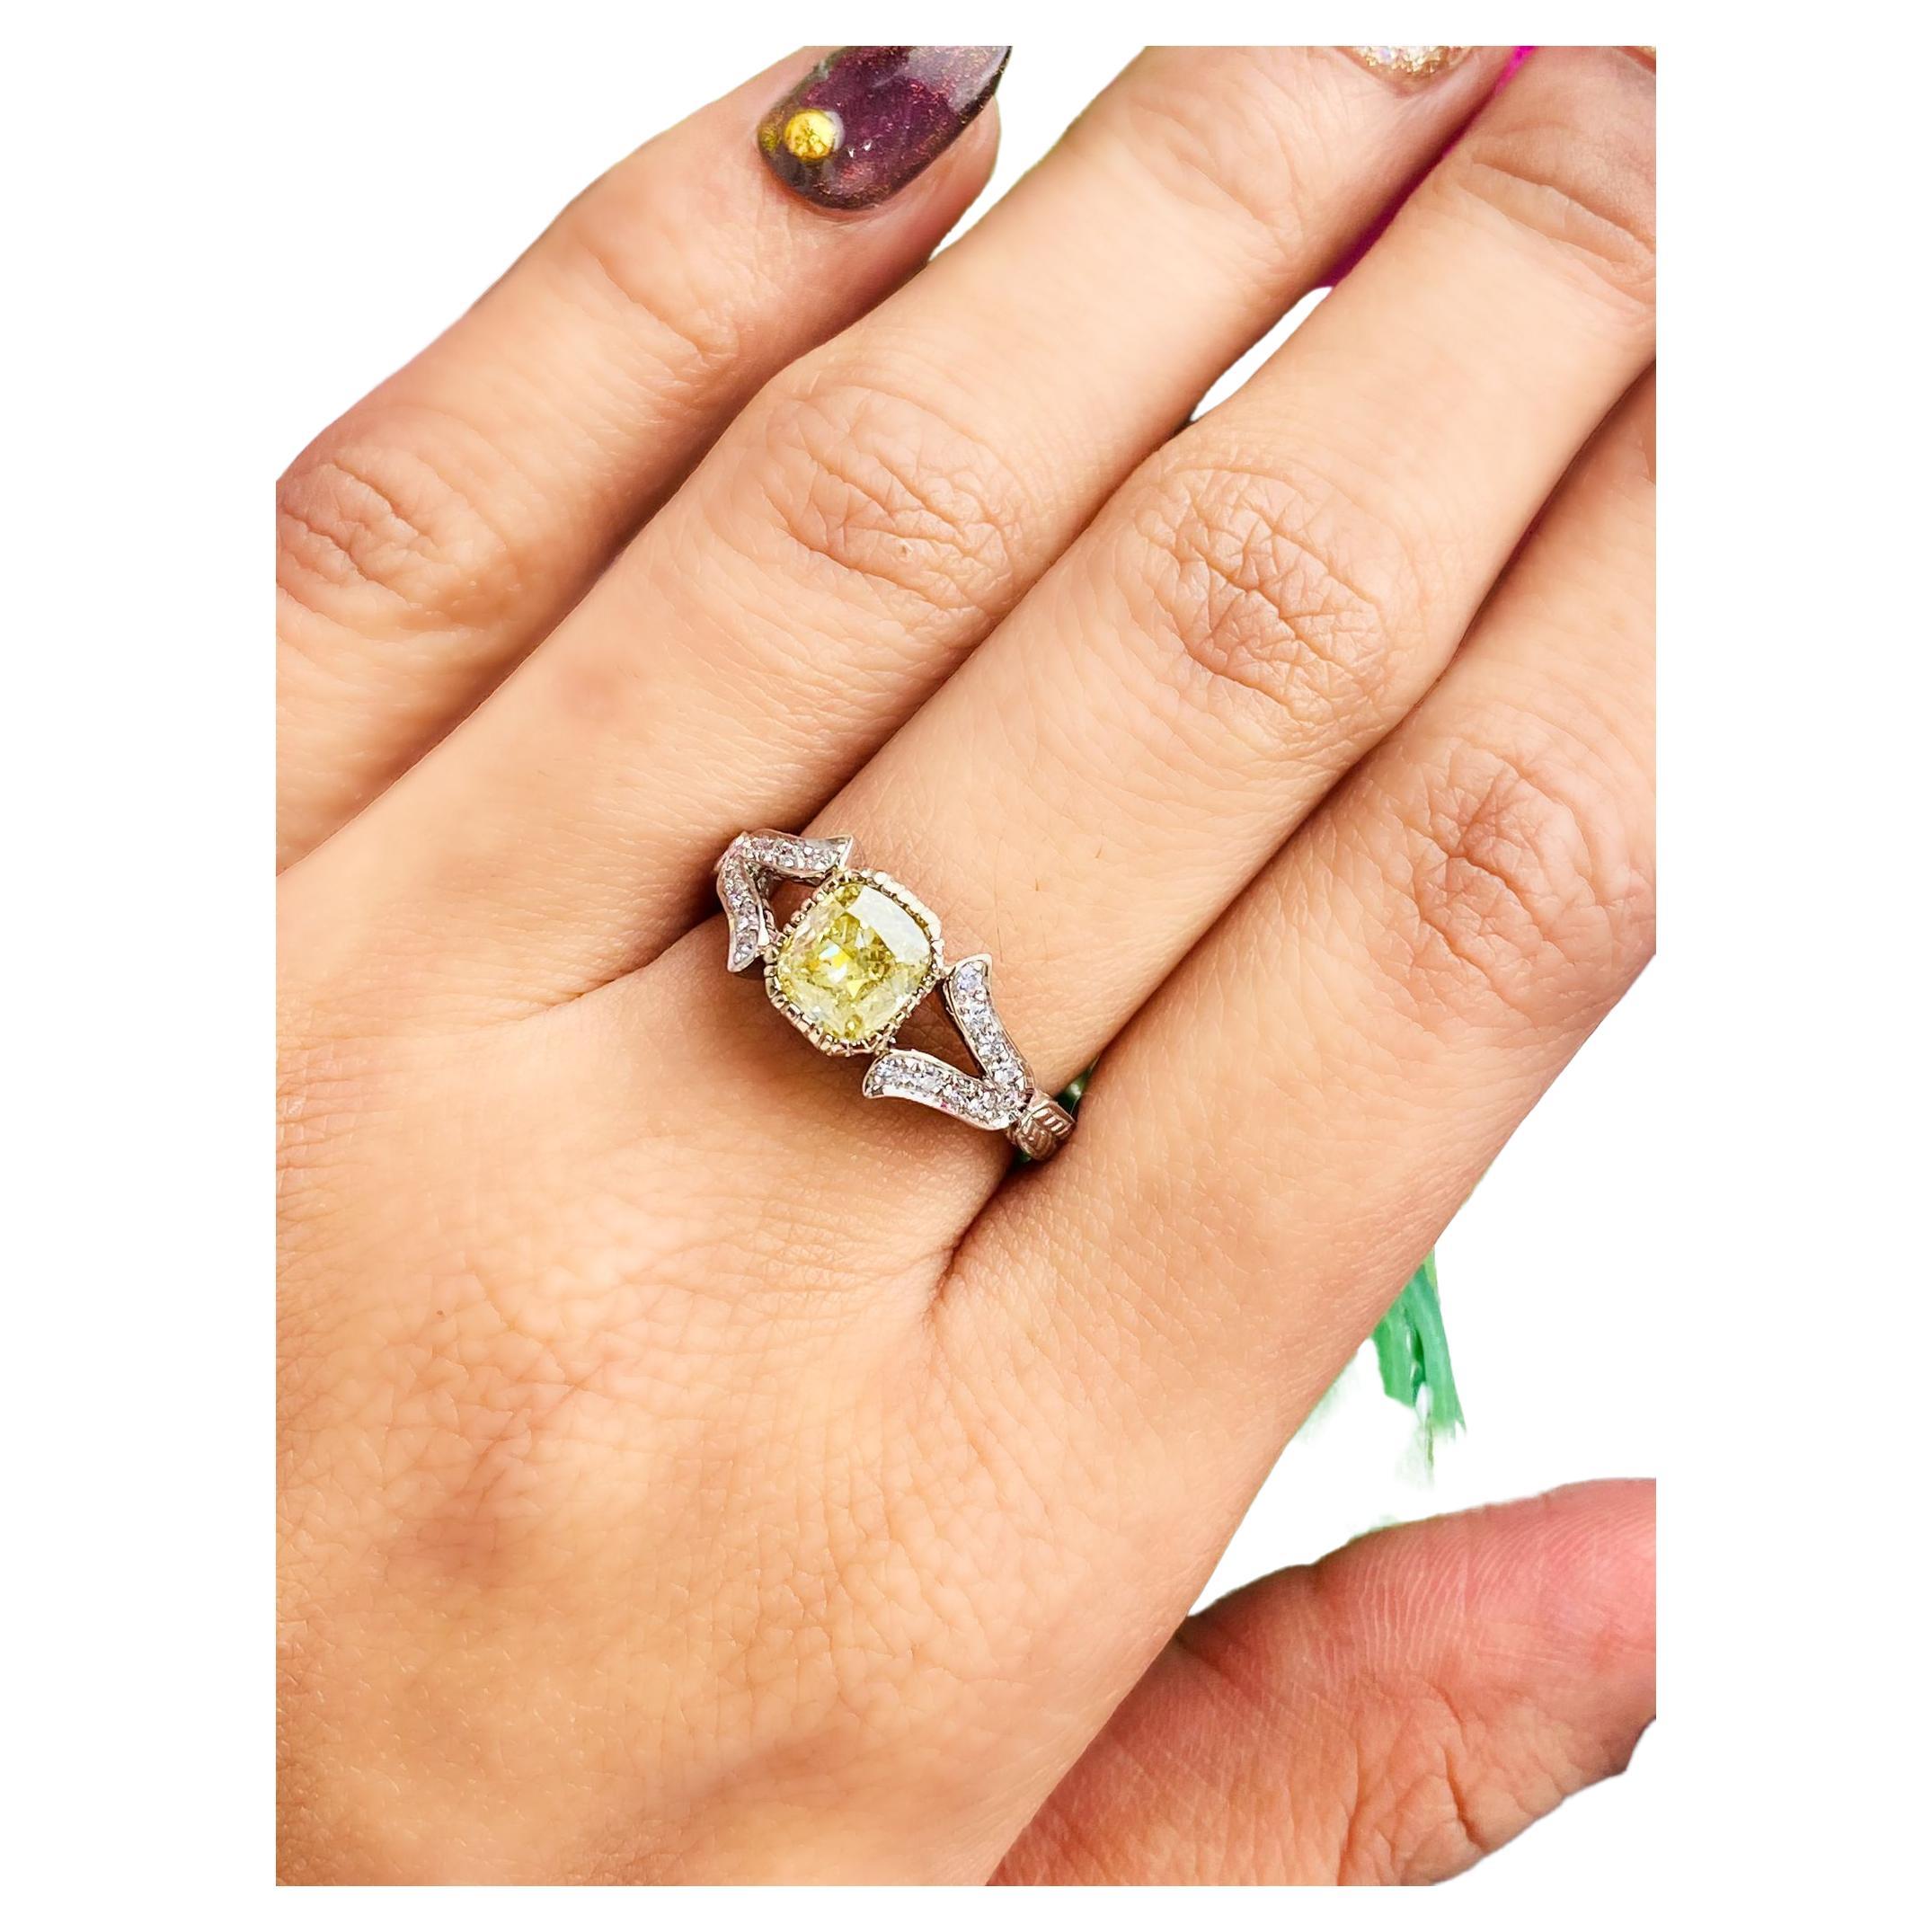 GIA Certified 1.02 Carat Fancy Light Yellow Diamond Ring For Sale at 1stDibs